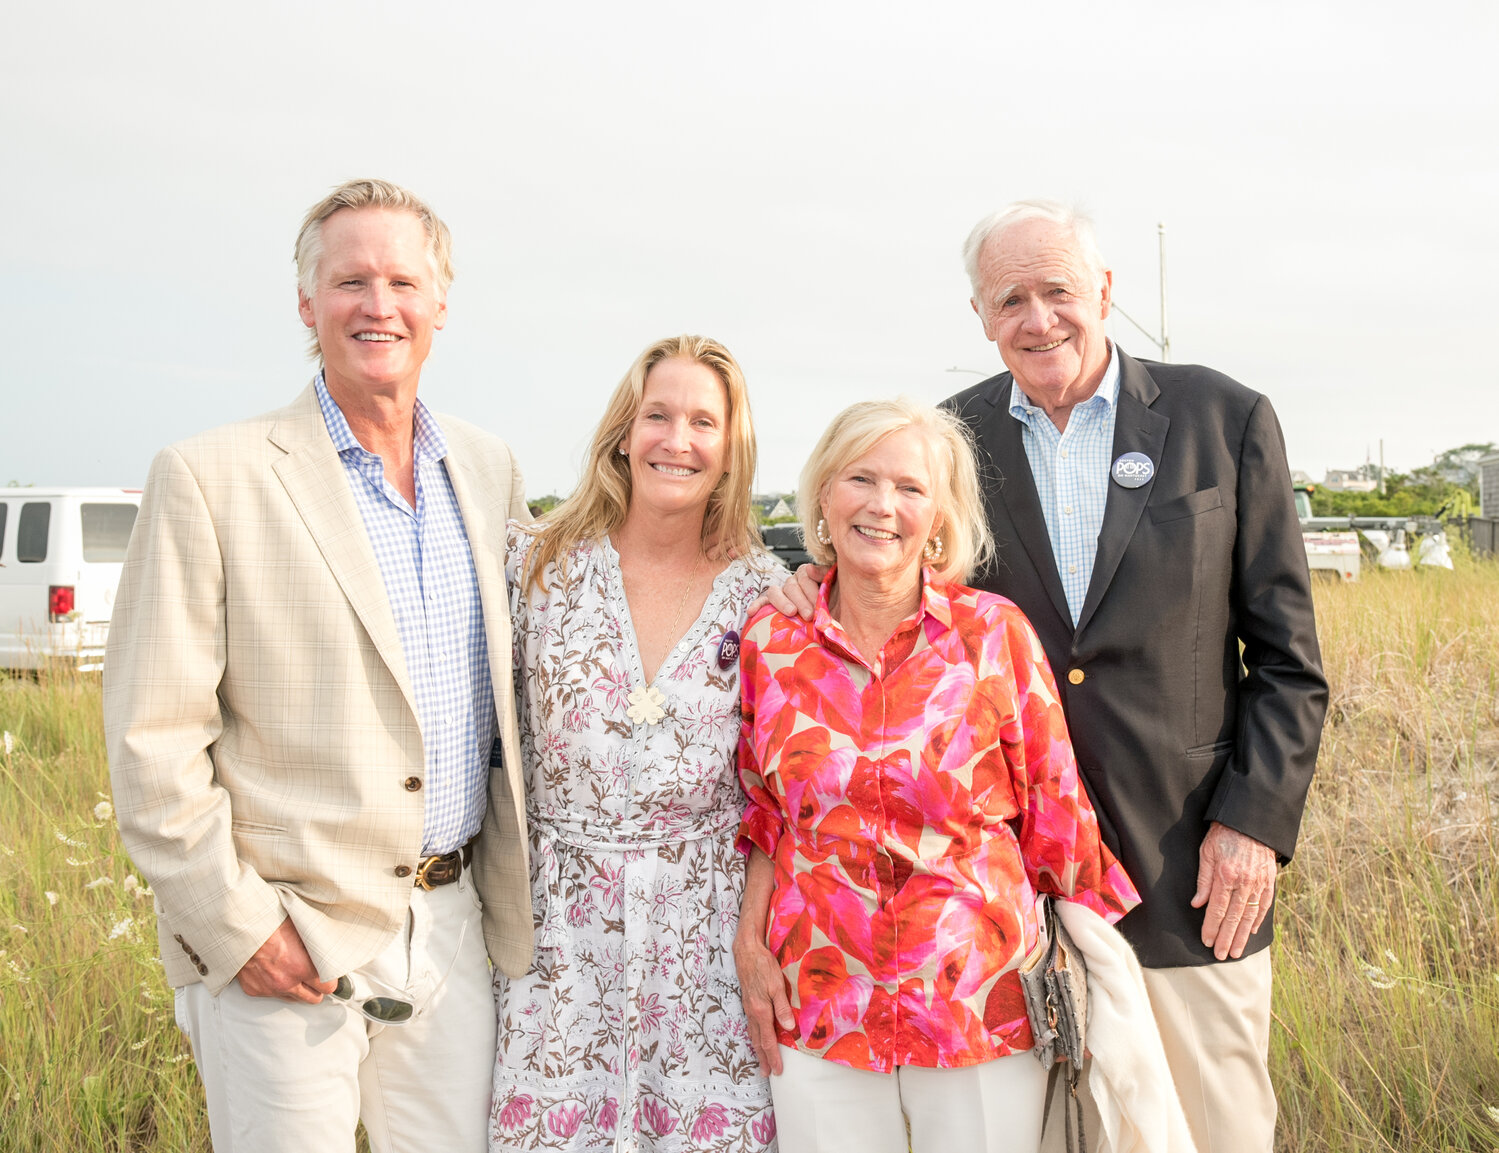 Charlie, Betsey, Anne and Chad Gifford